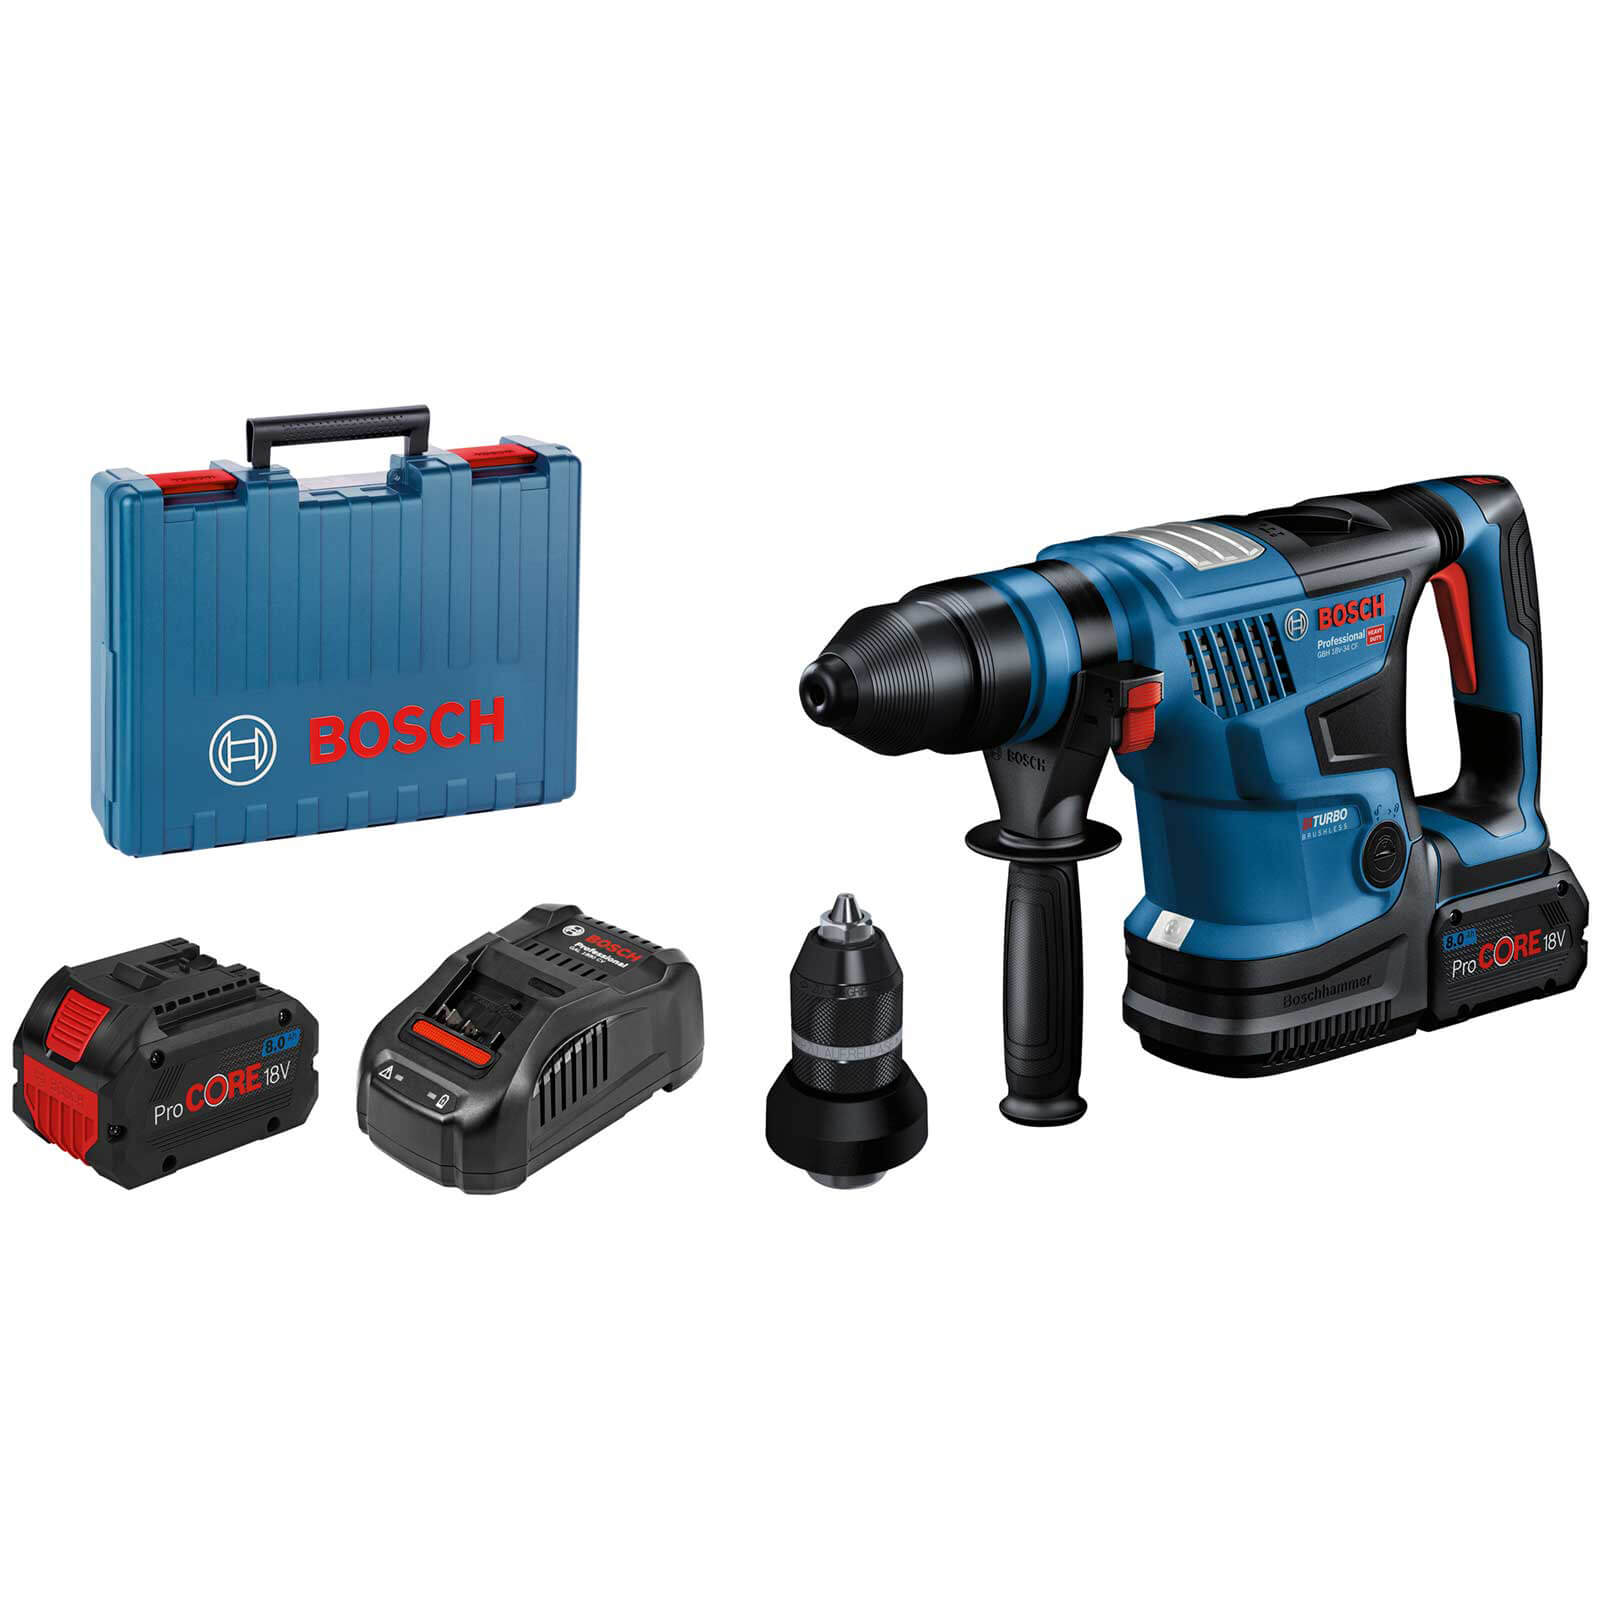 Image of Bosch GBH 18V-34 CF BITURBO 18v Brushless SDS Plus Rotary Hammer Drill 2 x 8ah Li-ion Charger Case